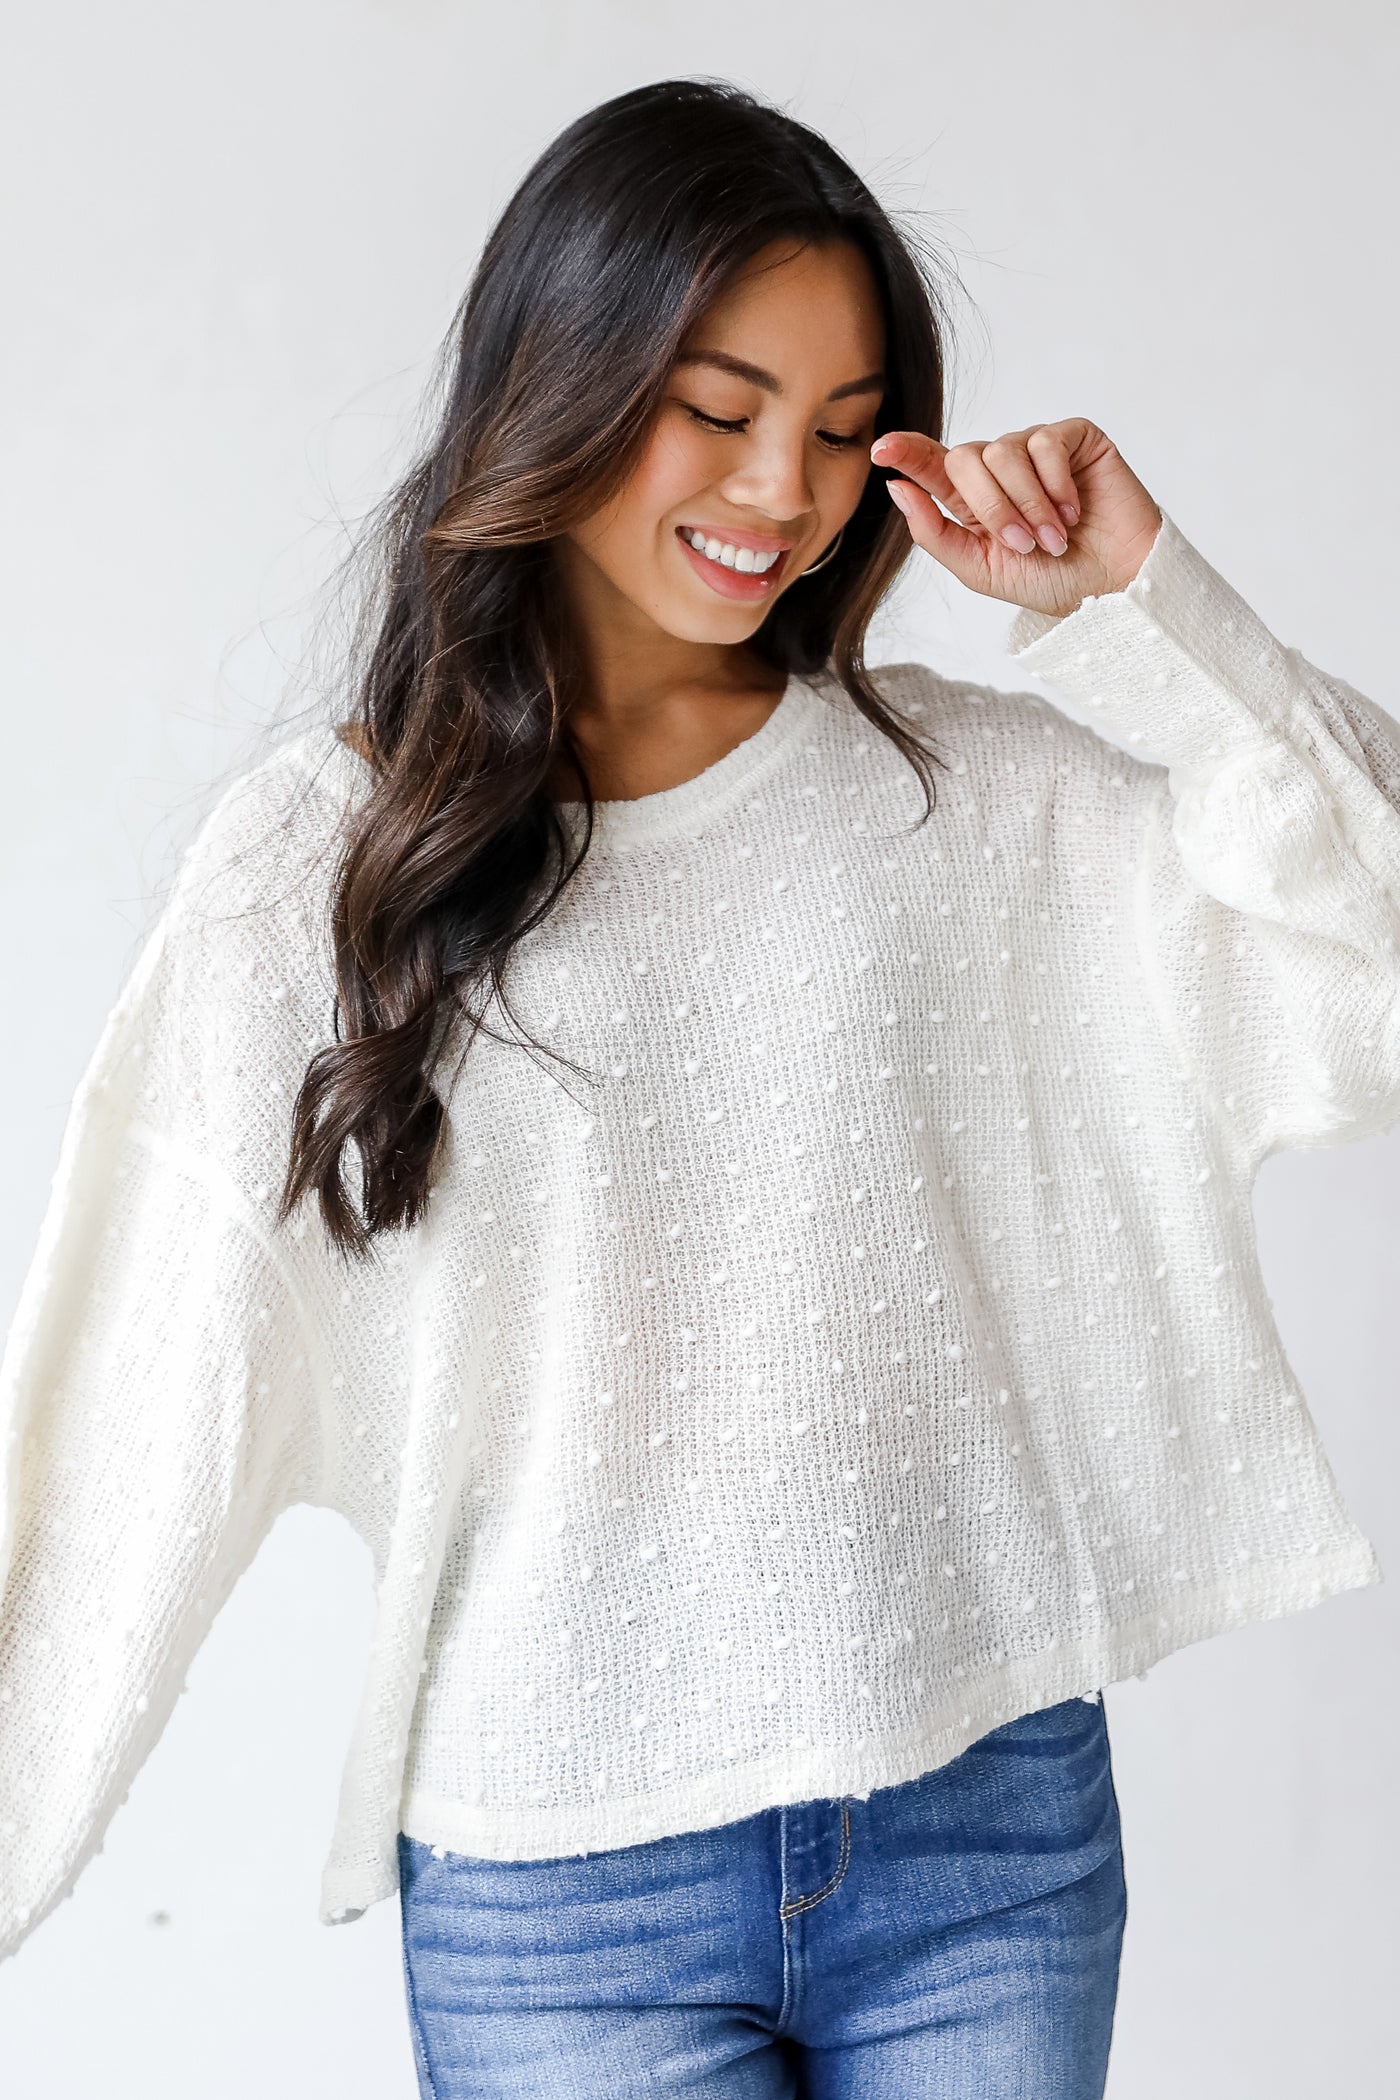 Pom Pom Sweater in ivory front view